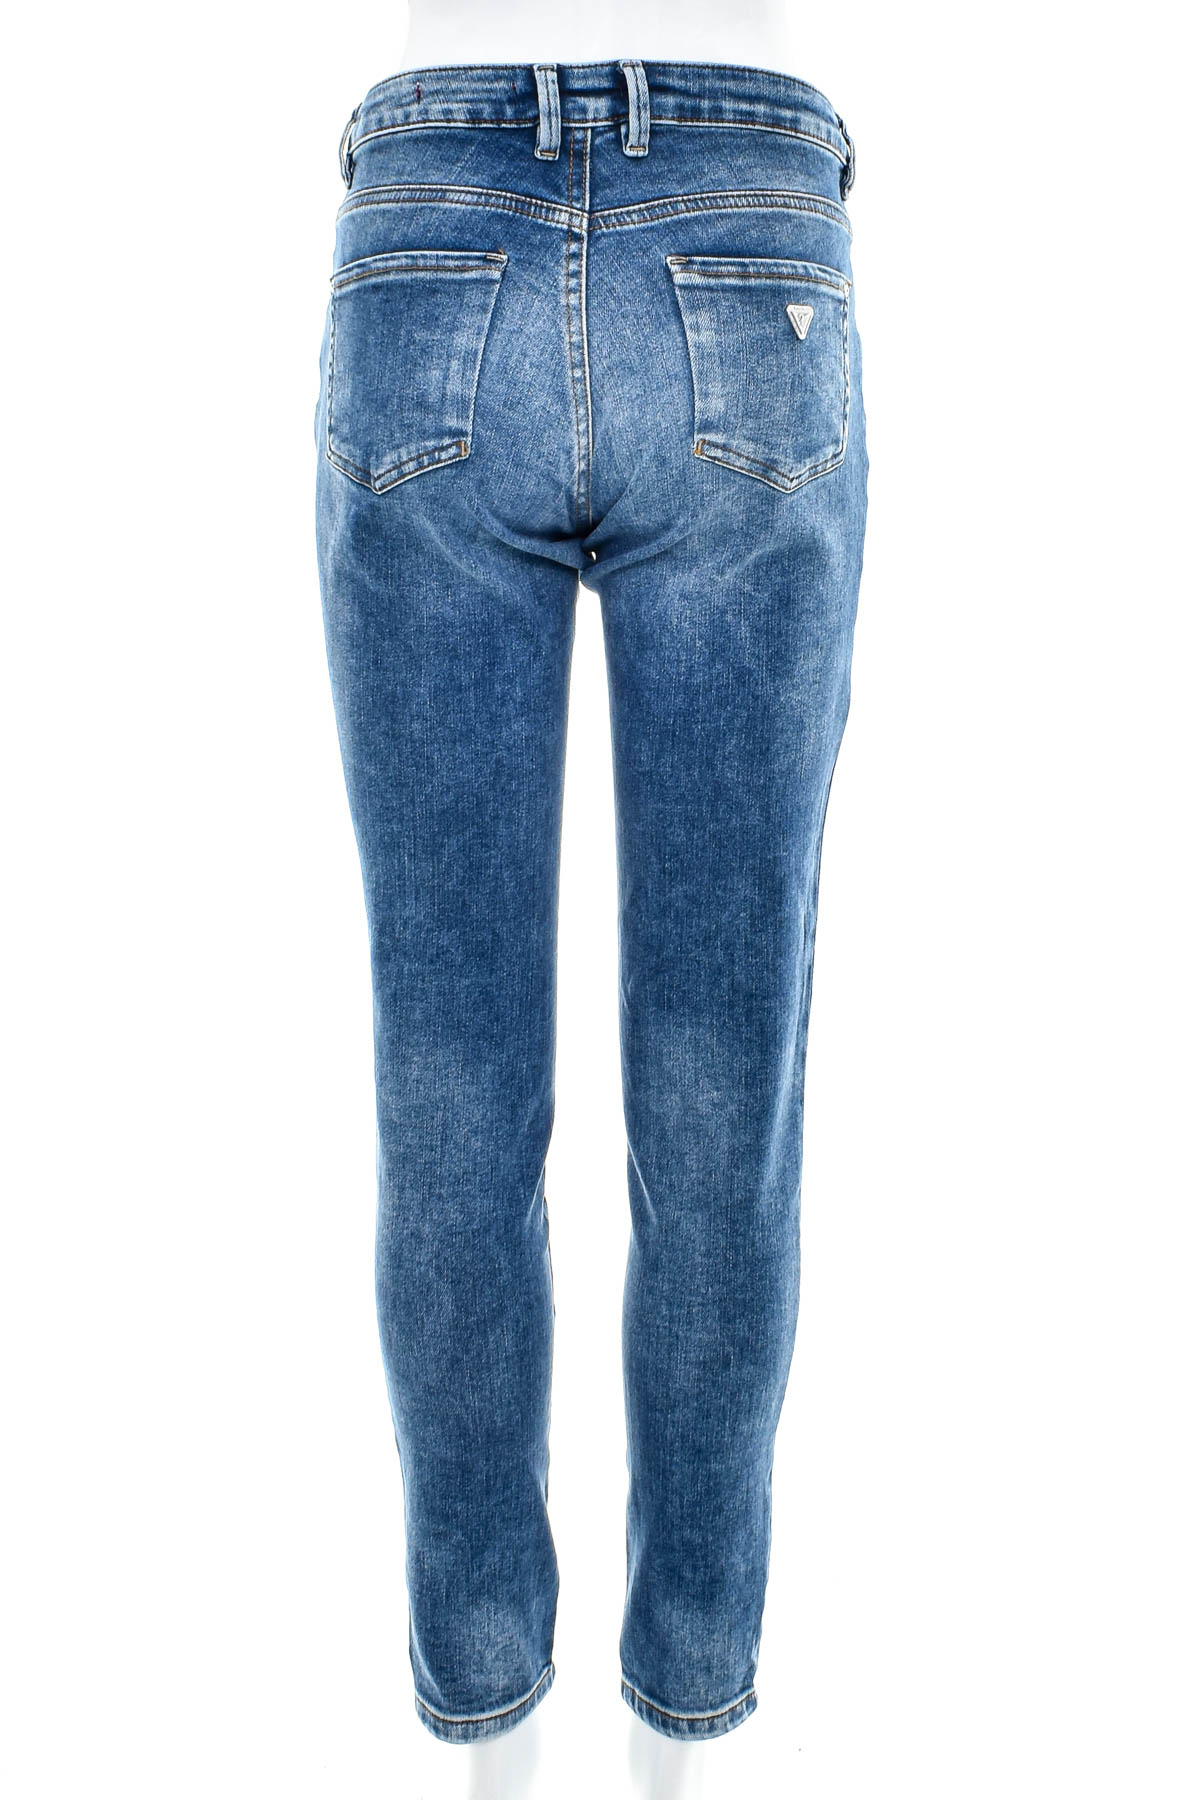 Women's jeans - GUESS - 1